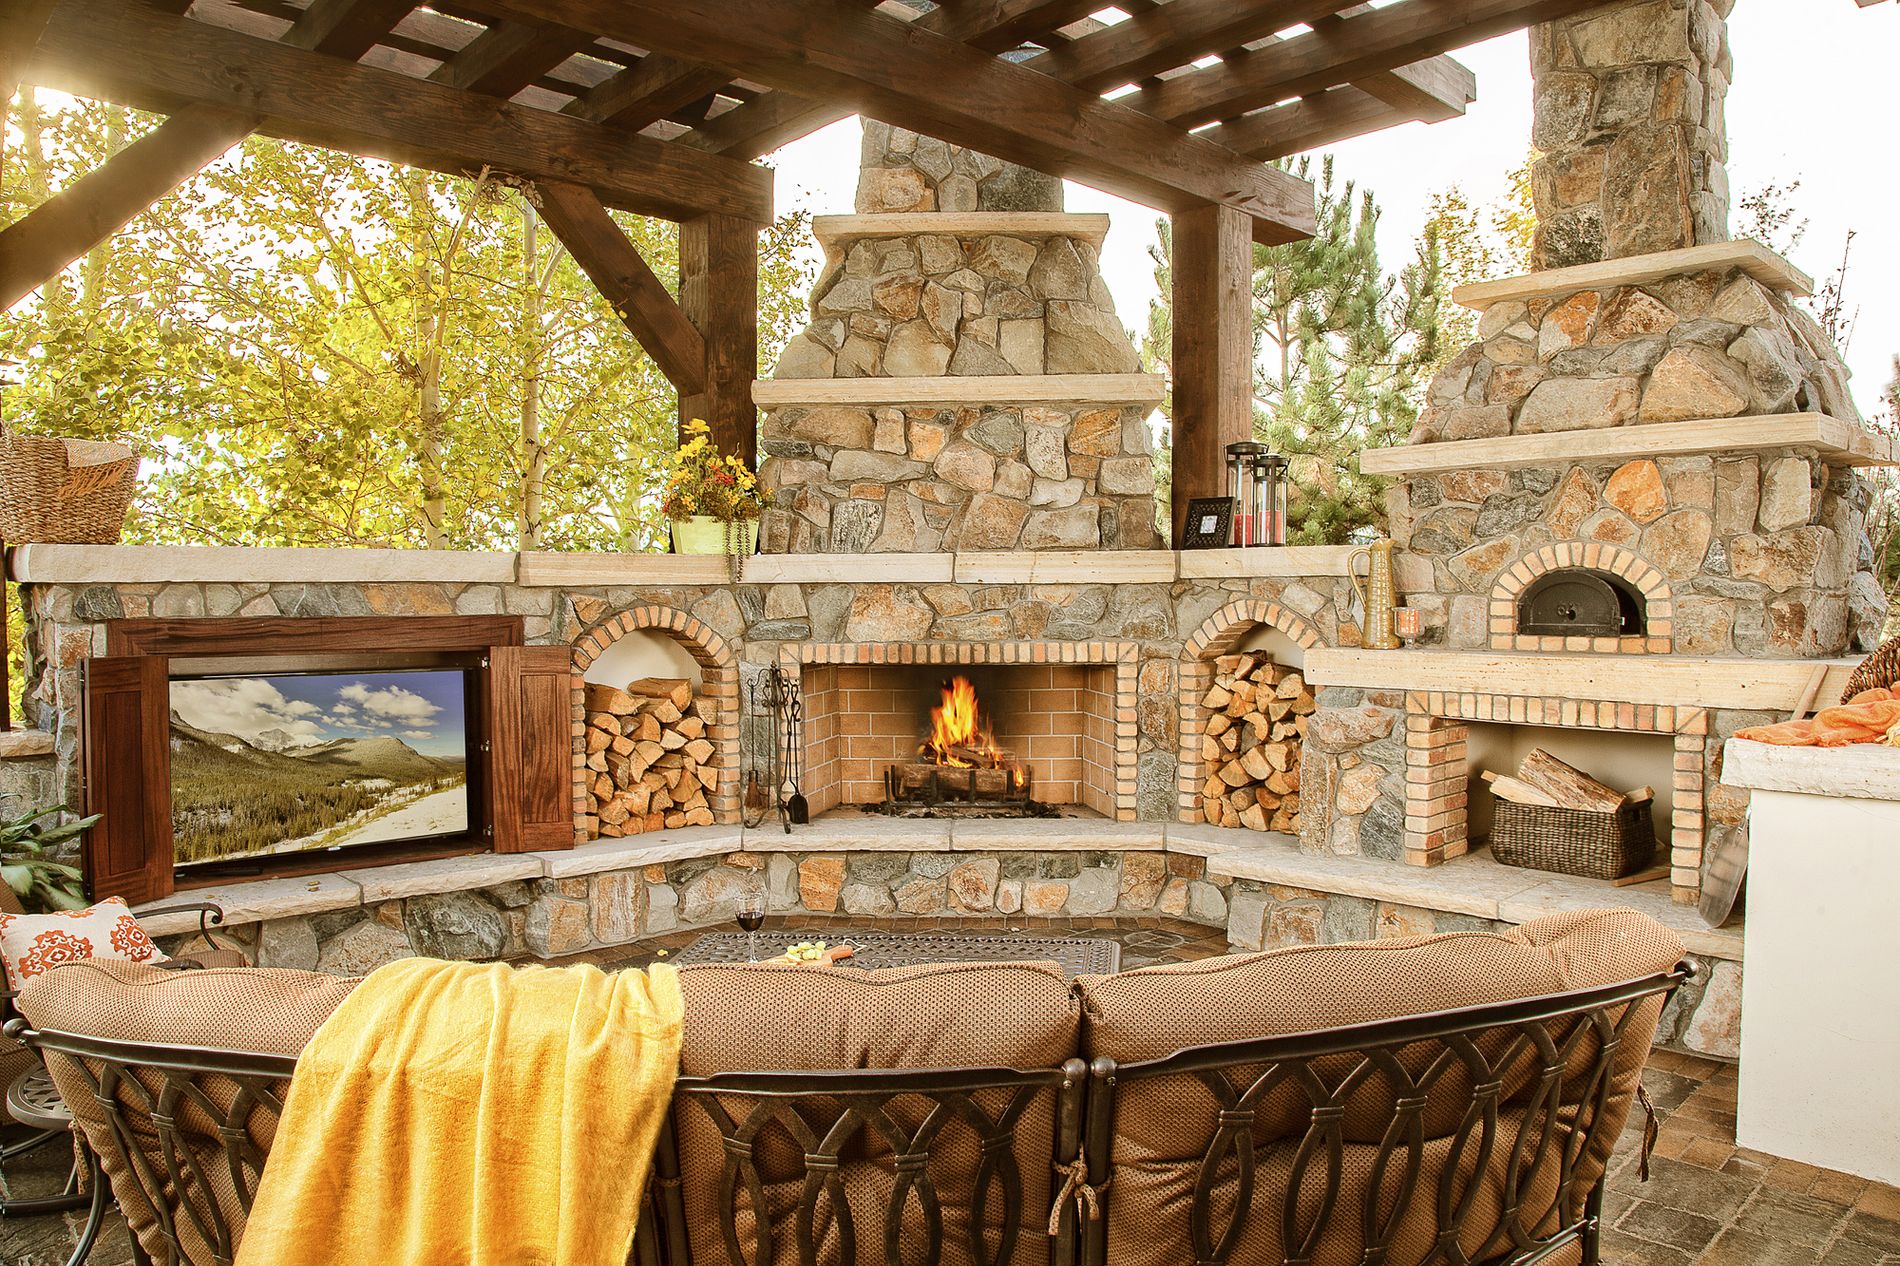 Wood burning outdoor fireplace with television cabinet and pizza oven